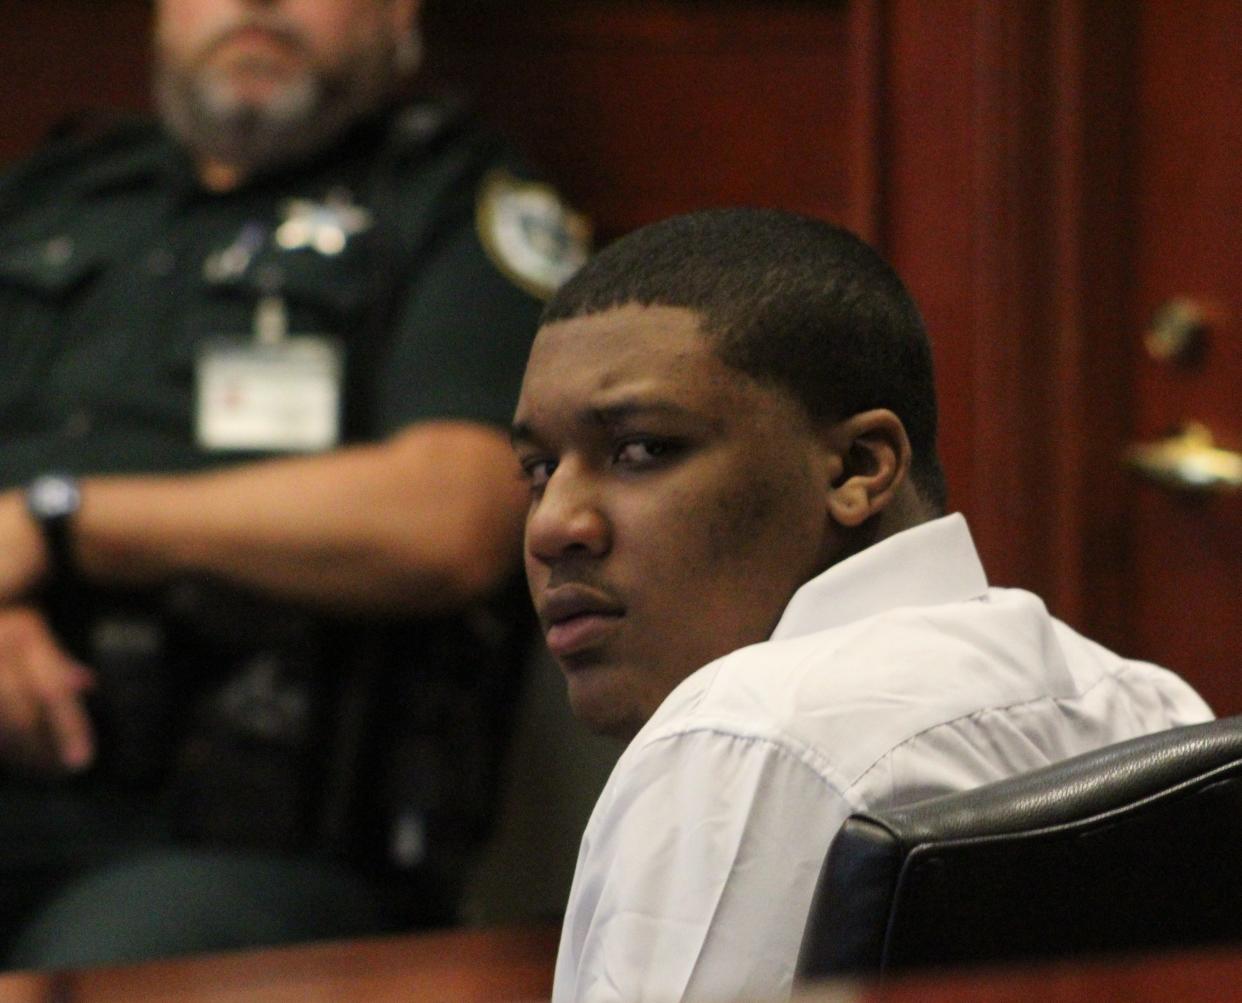 Kveon Asun Jiles, 17, went on trial in DeLand this week charged with second-degree murder in the 2021 killing of LaRoyce Covington in DeLand.